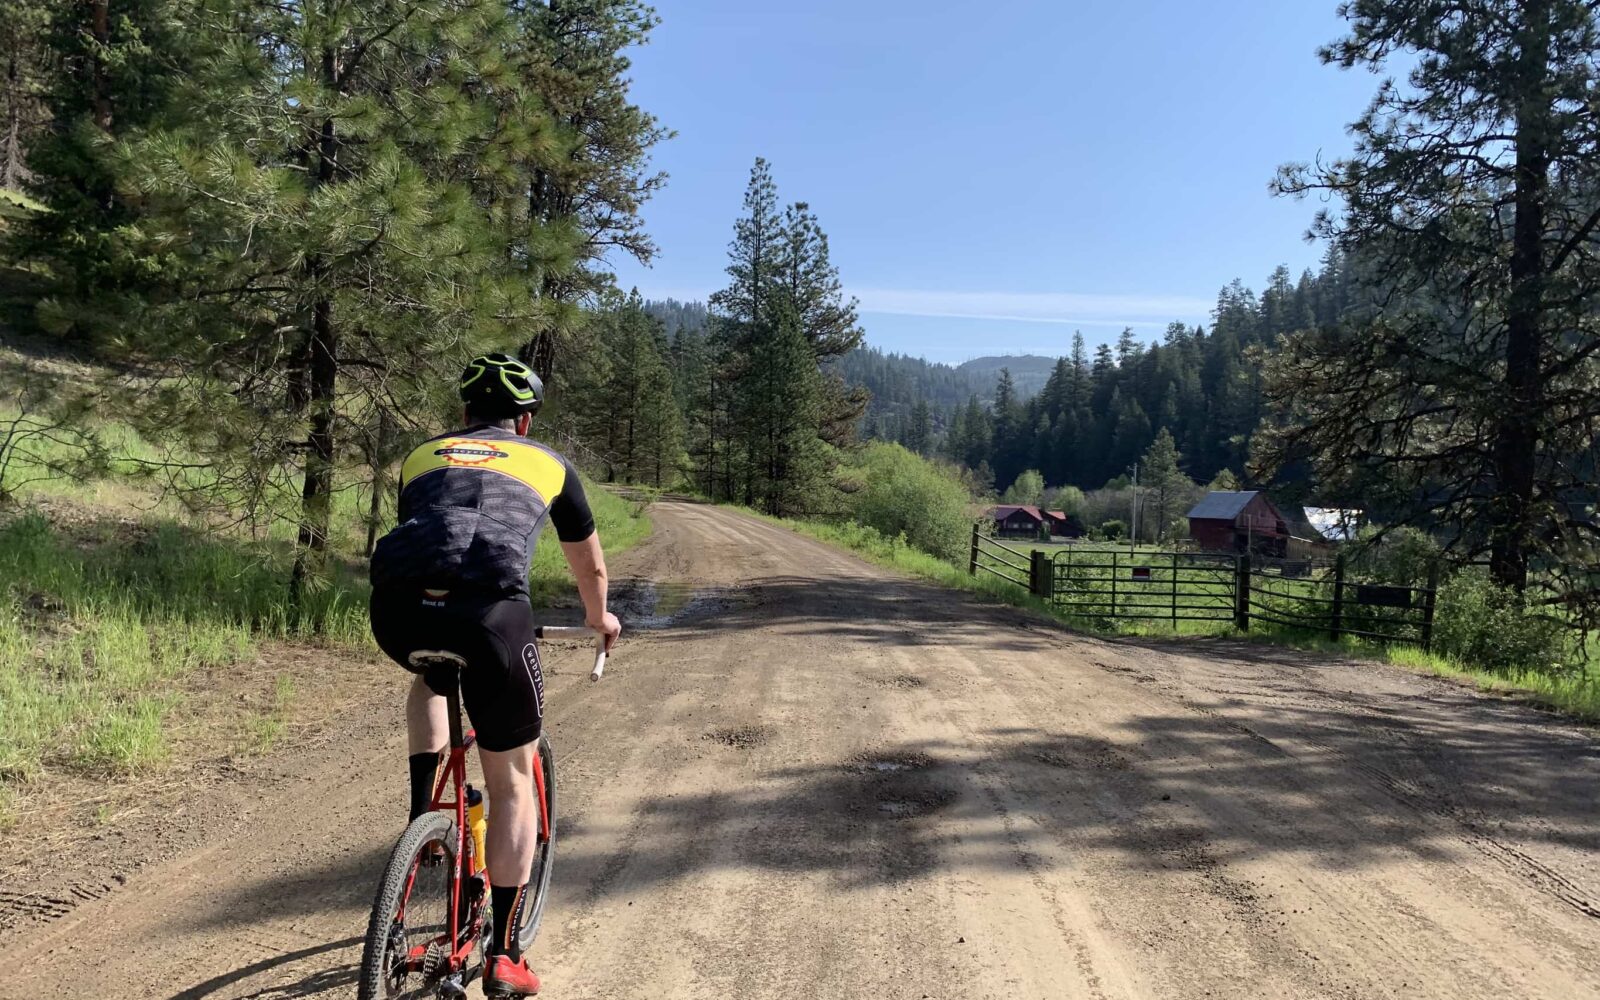 Riding out on a hard-packed gravel road in the Ochocos.